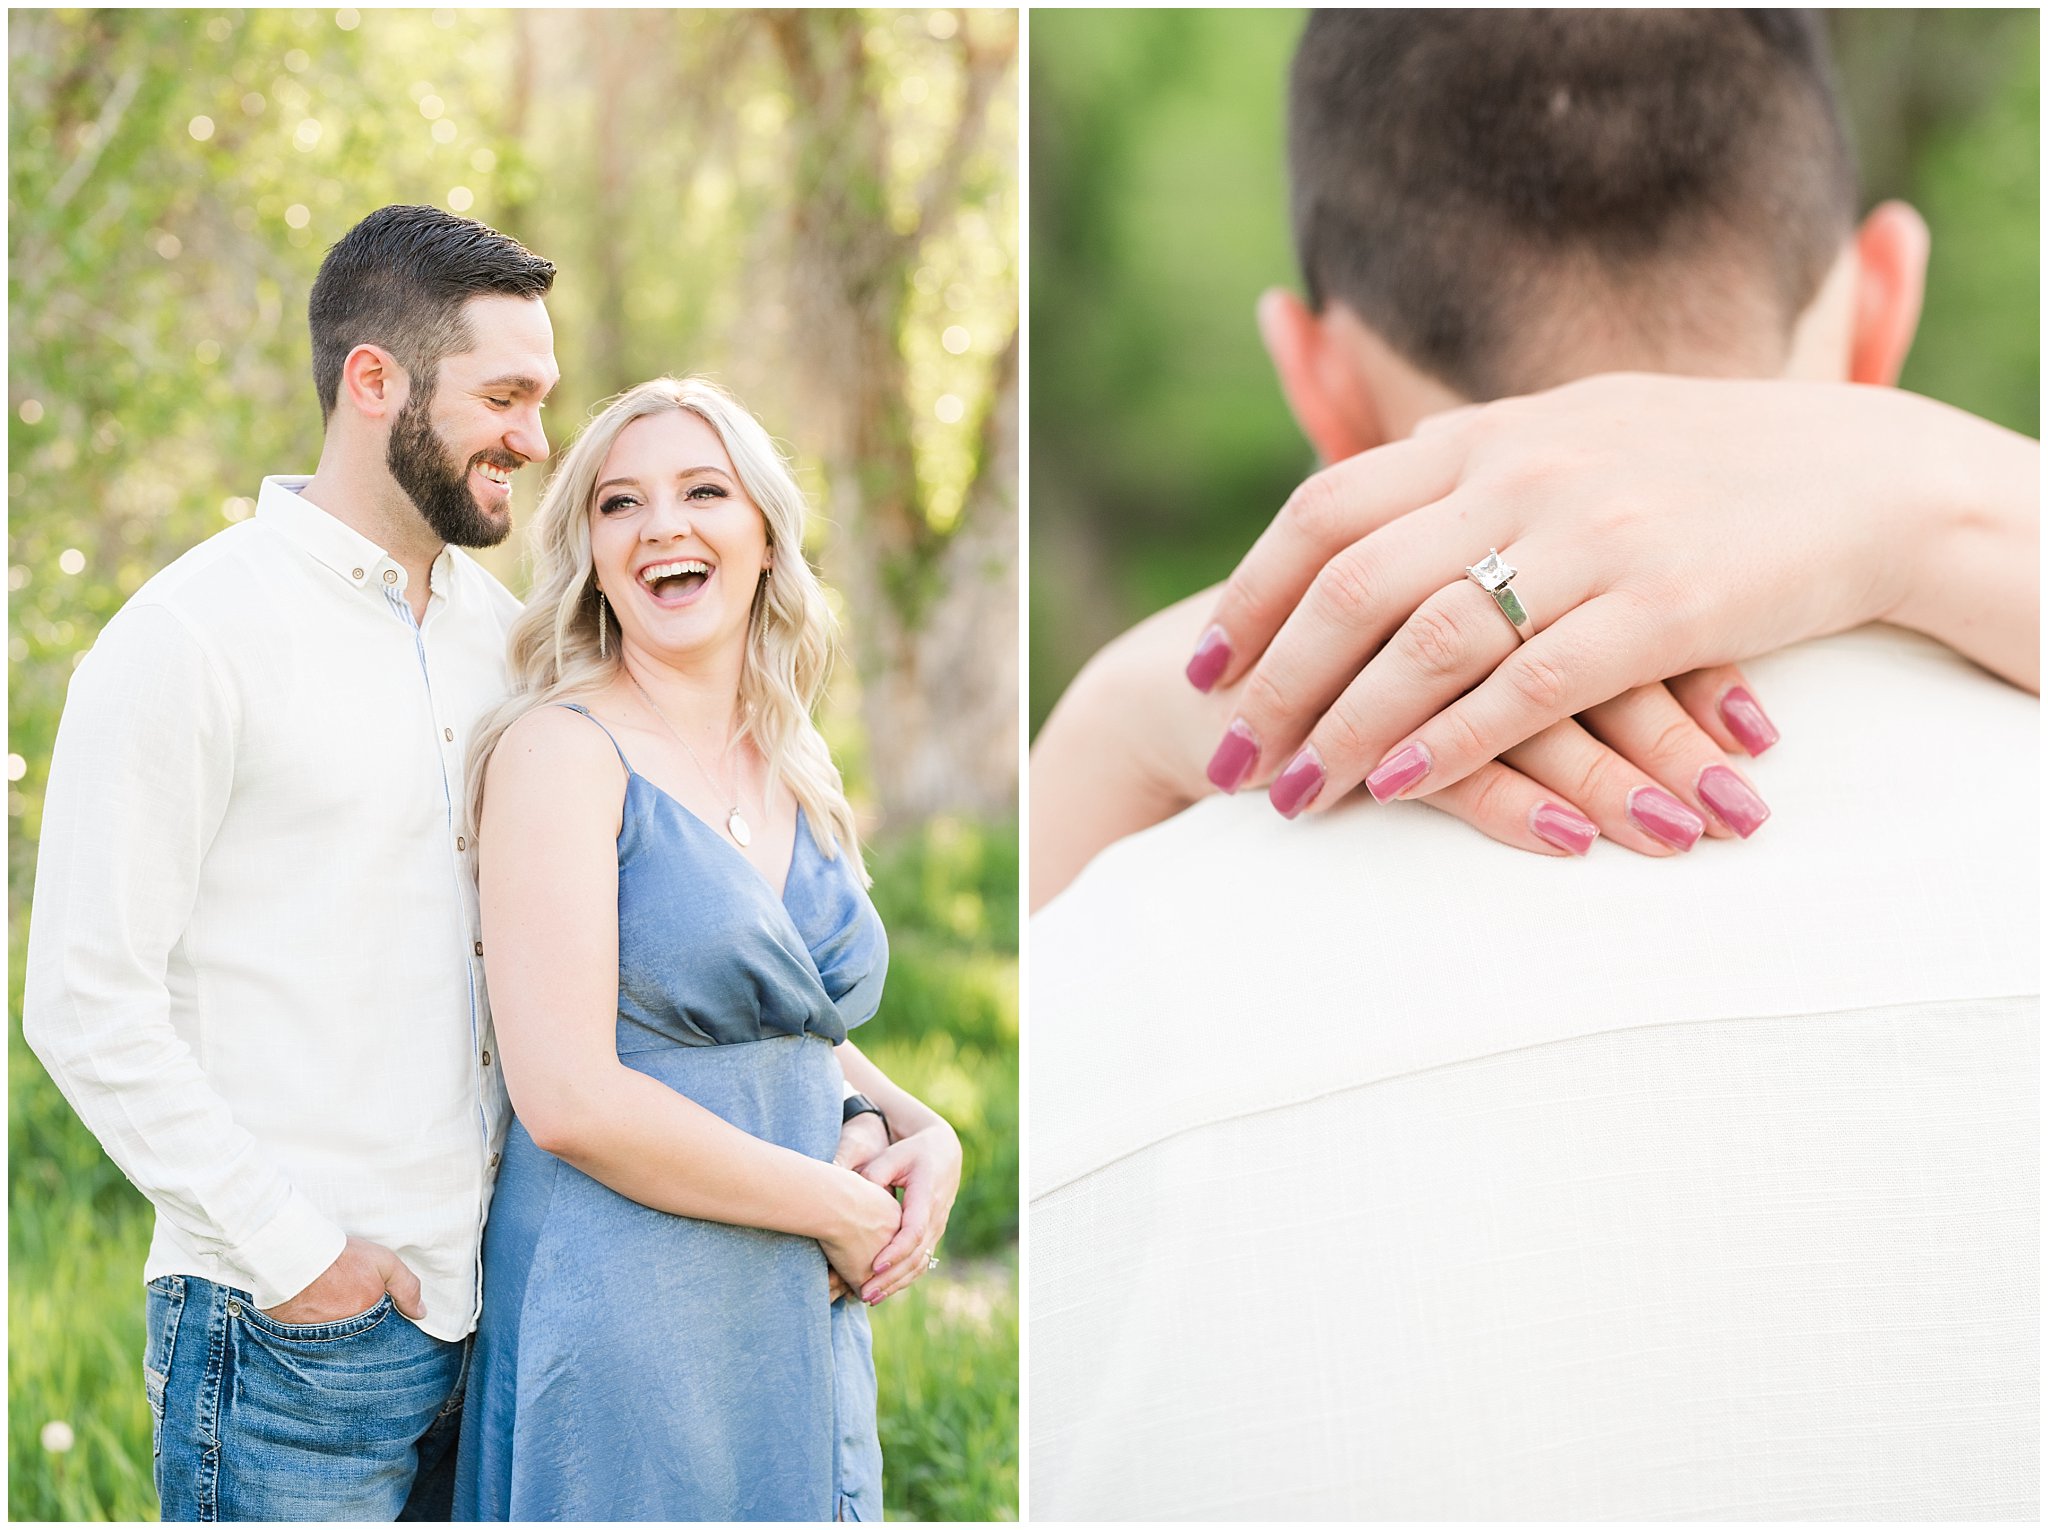 Couple in blue dress and white shirt during Snowbasin Wildflower Engagement | Jessie and Dallin Photography